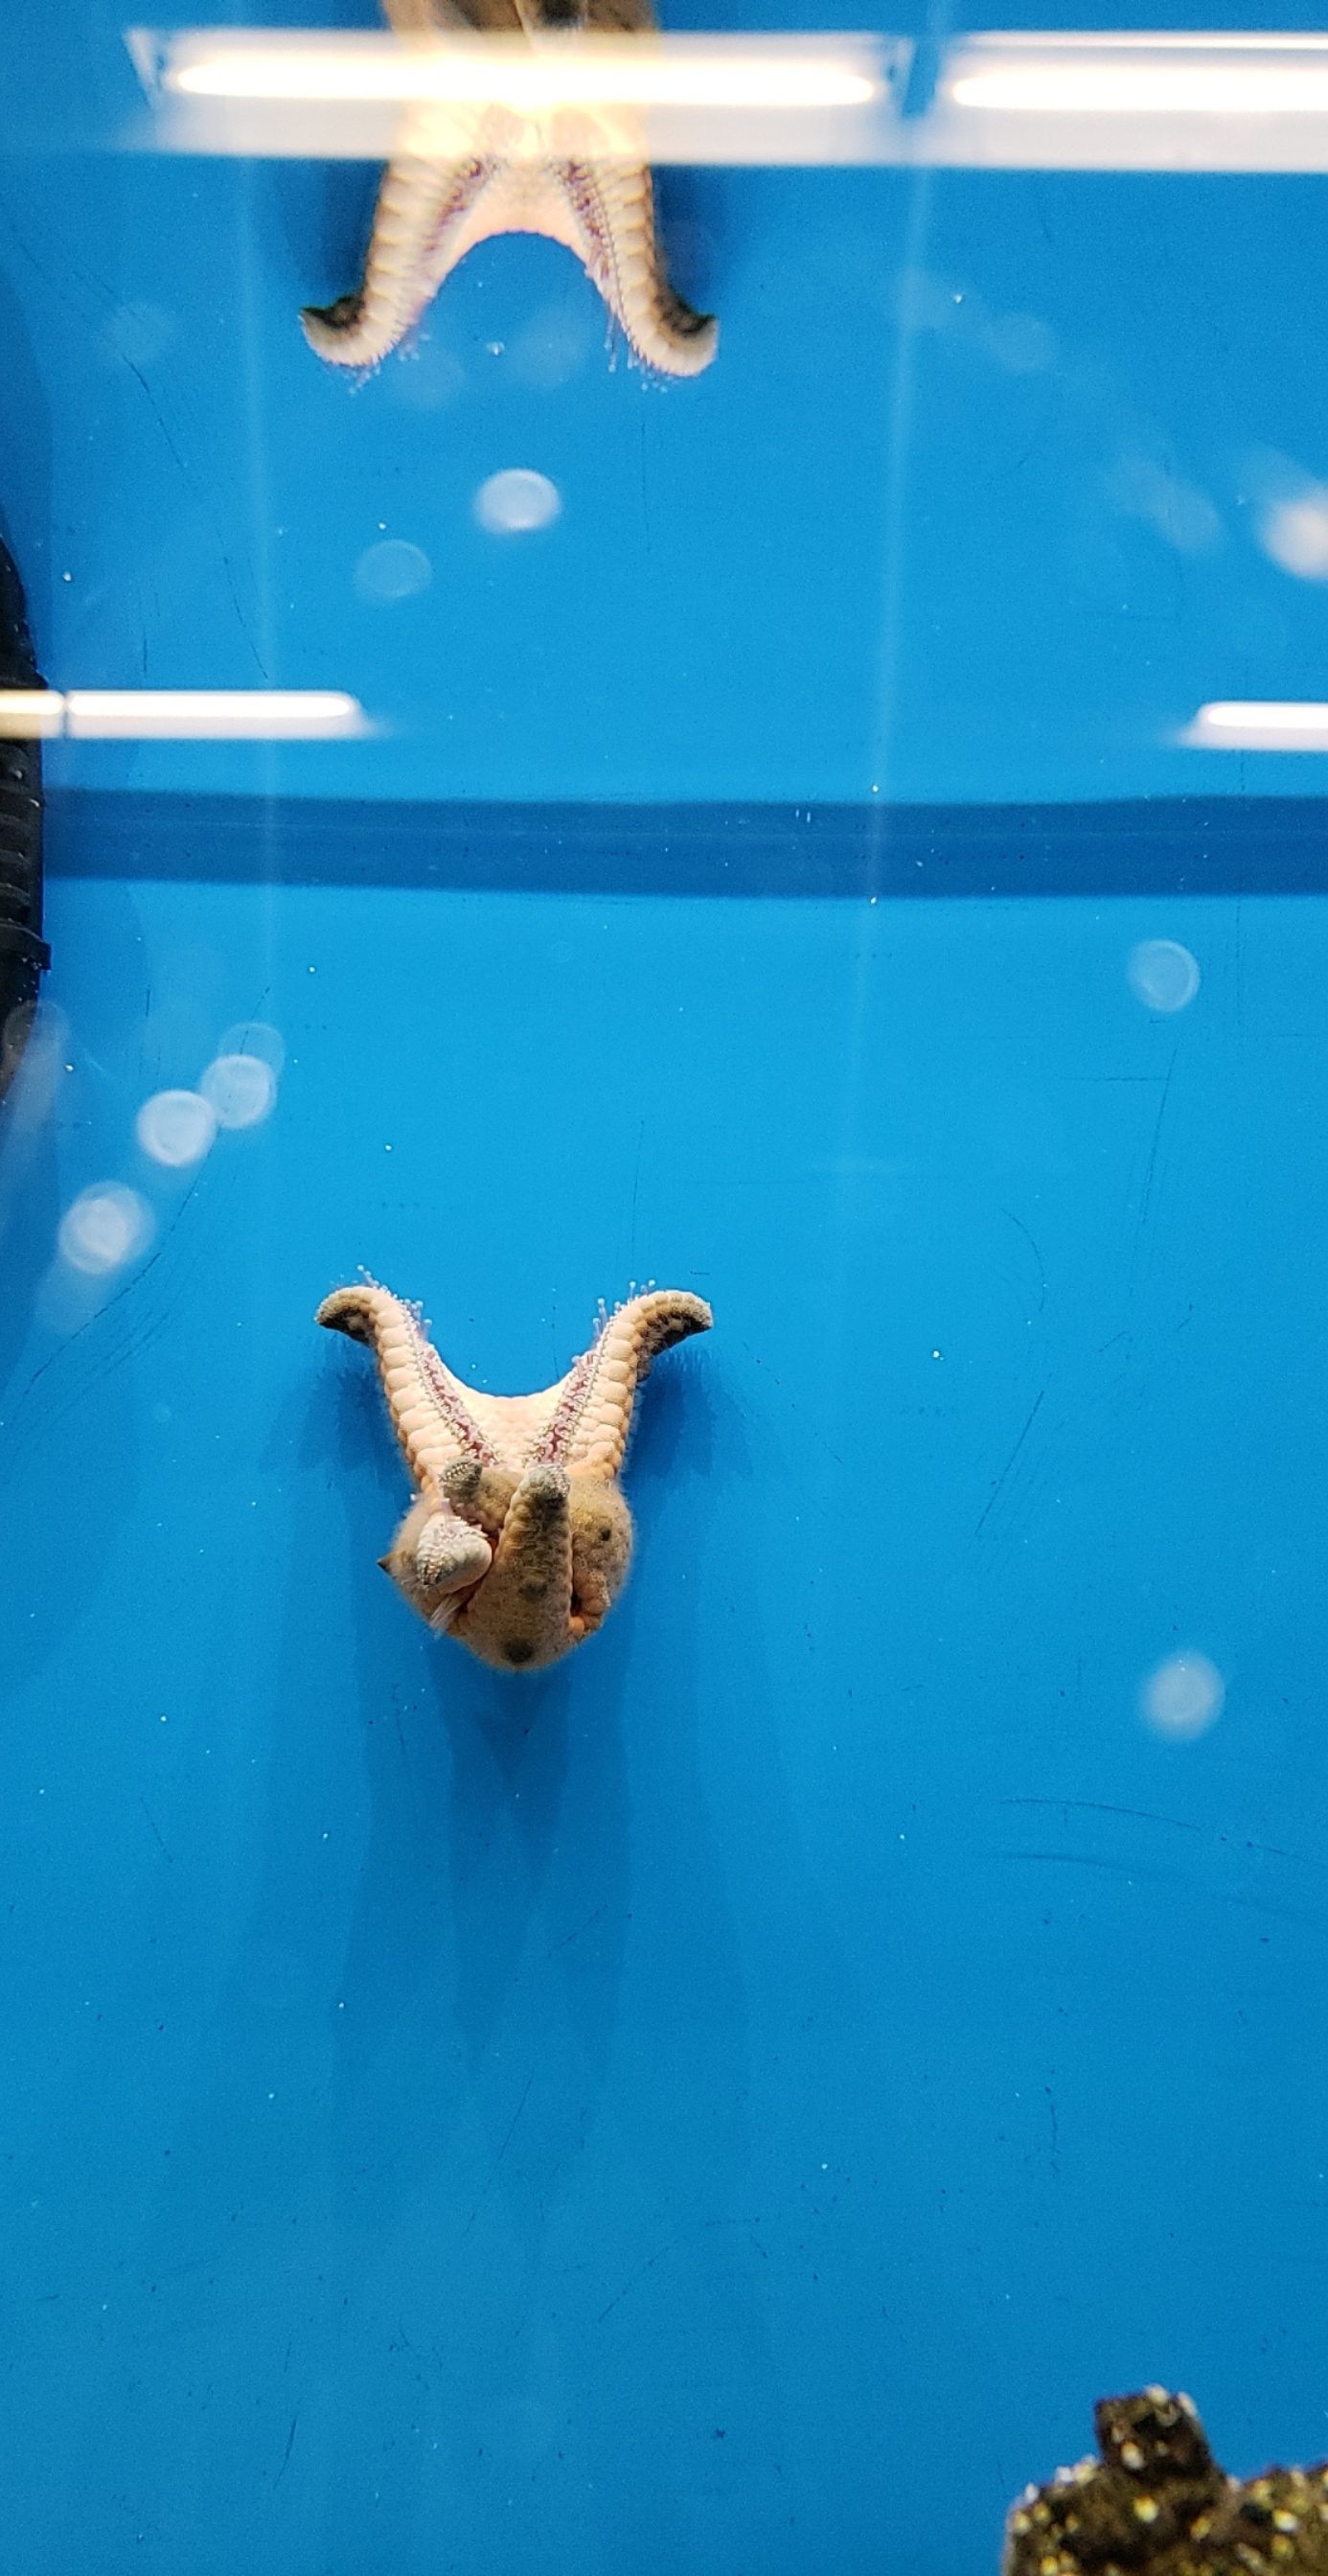 My starfish was not happy to see me today.